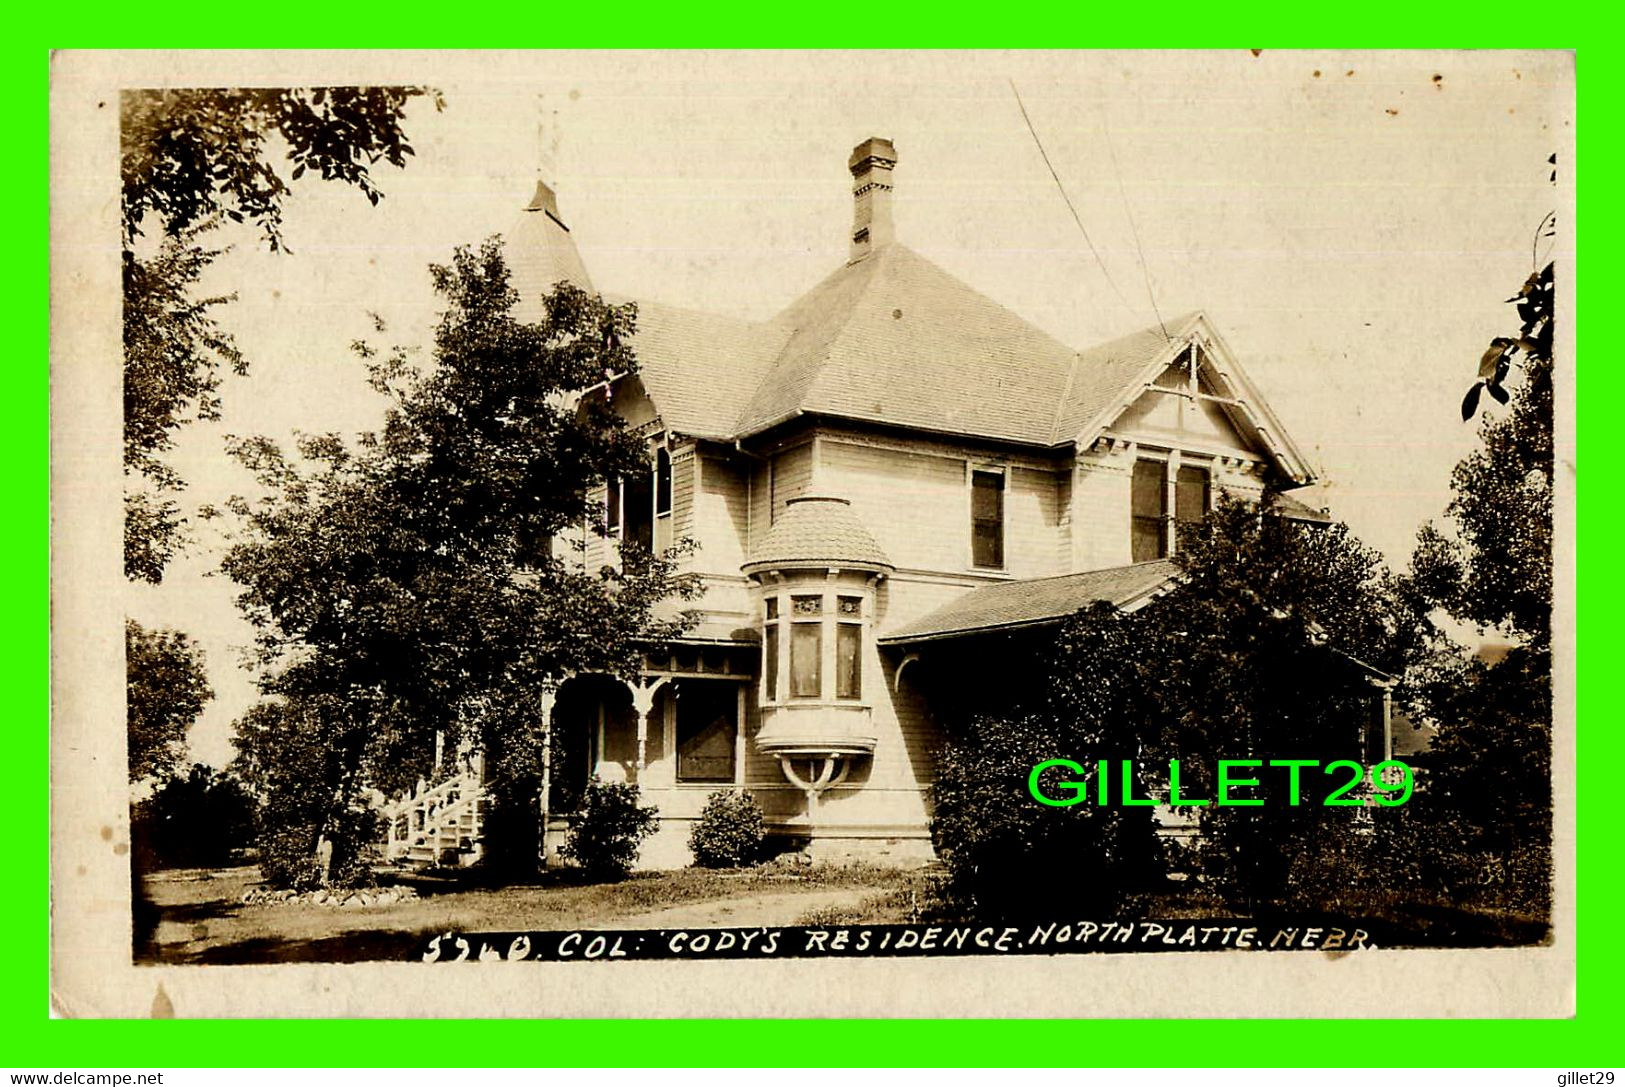 NORTH PLATTE, NE - CODY'S RESIDENCE - J BOWERS, PHOTOGRAPHIC CO - TRAVEL IN 1909 - - North Platte